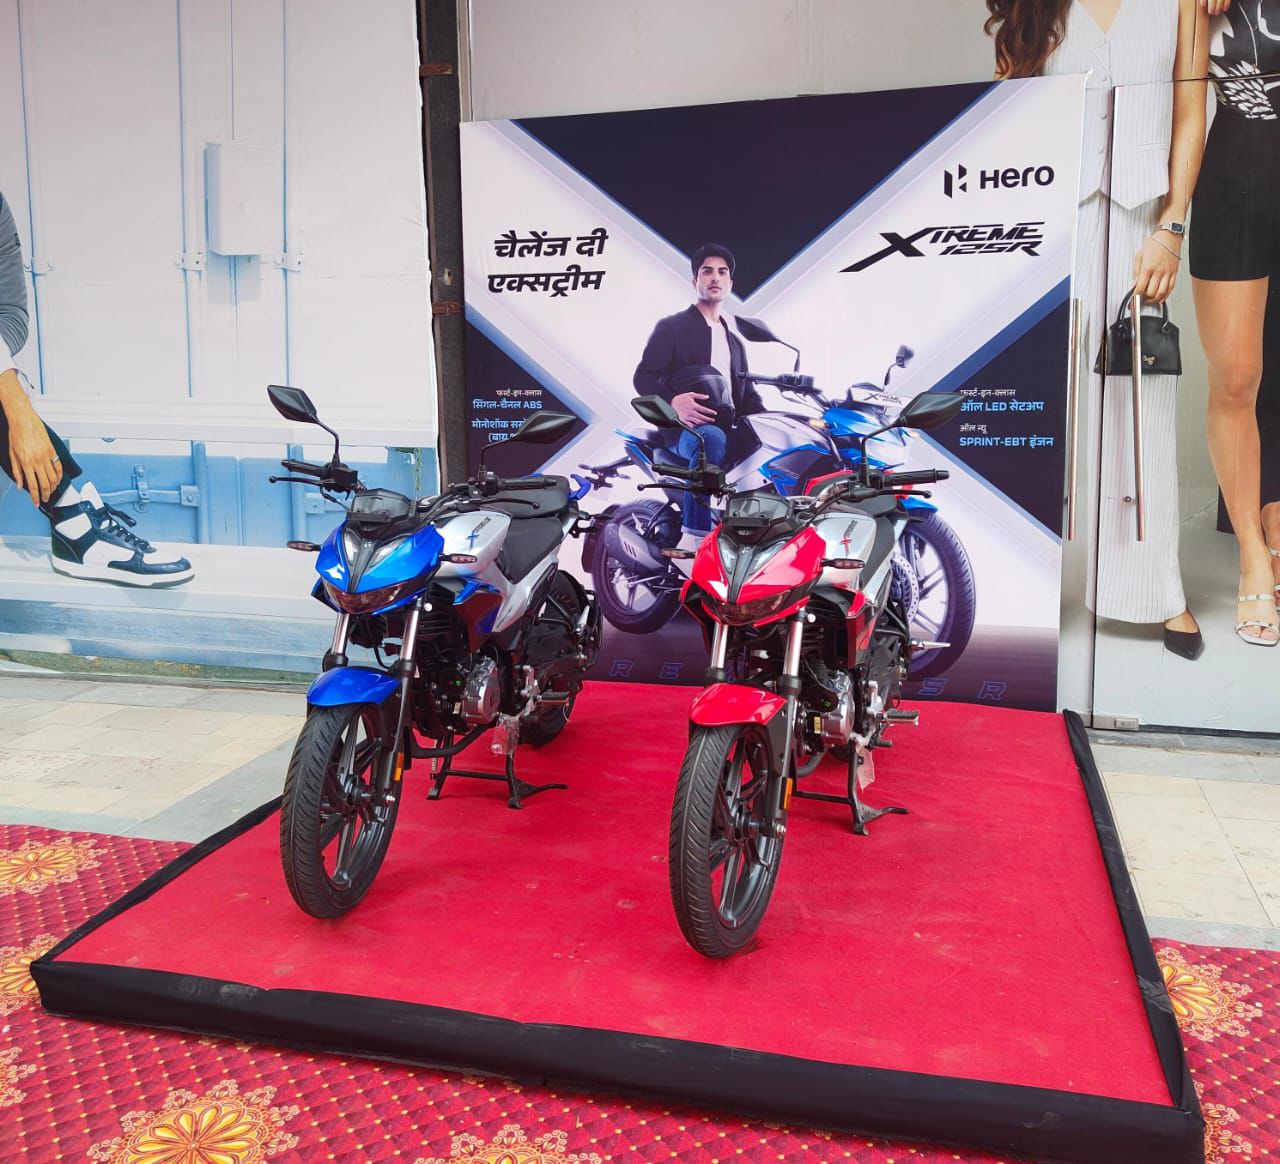 Urban Square Mall Hosts Successful Launch of Hero Mavrick 440 andXtreme 125R